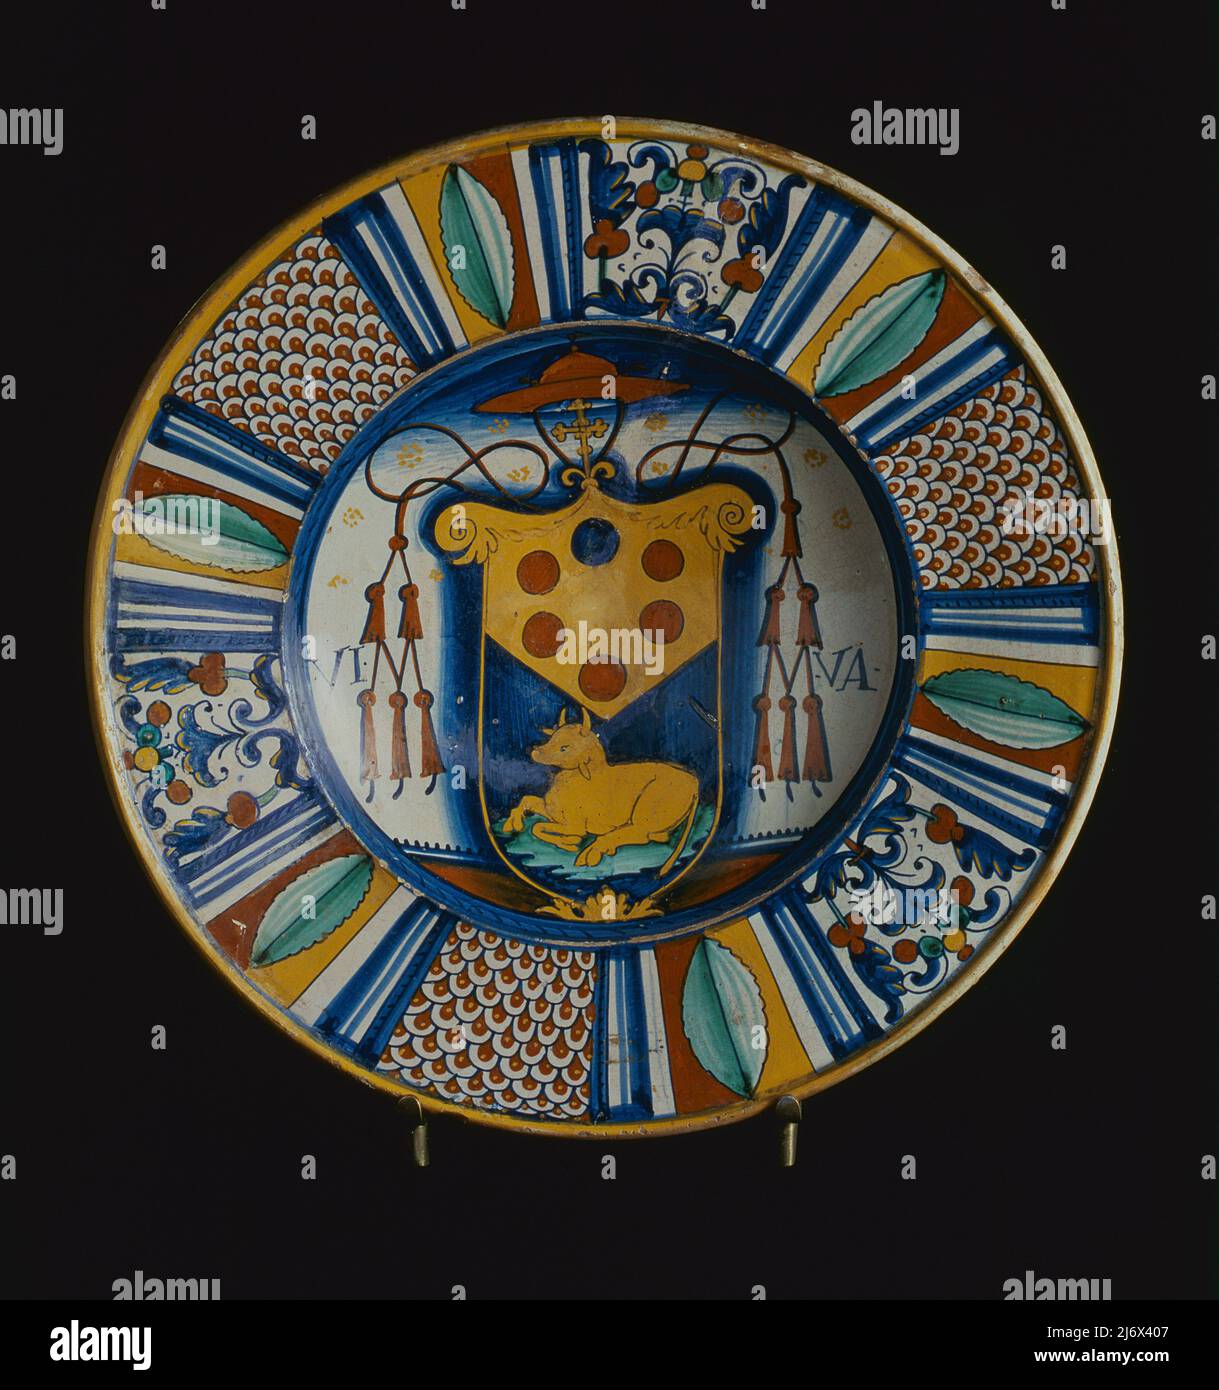 Maiolica plate decorated with the coat of arms of a Medici-Passerini cardinal, Italian, 16th century (ceramic); Museo Nazionale del Bargello, Florence, Tuscany, Italy;  out of copyright. Stock Photo